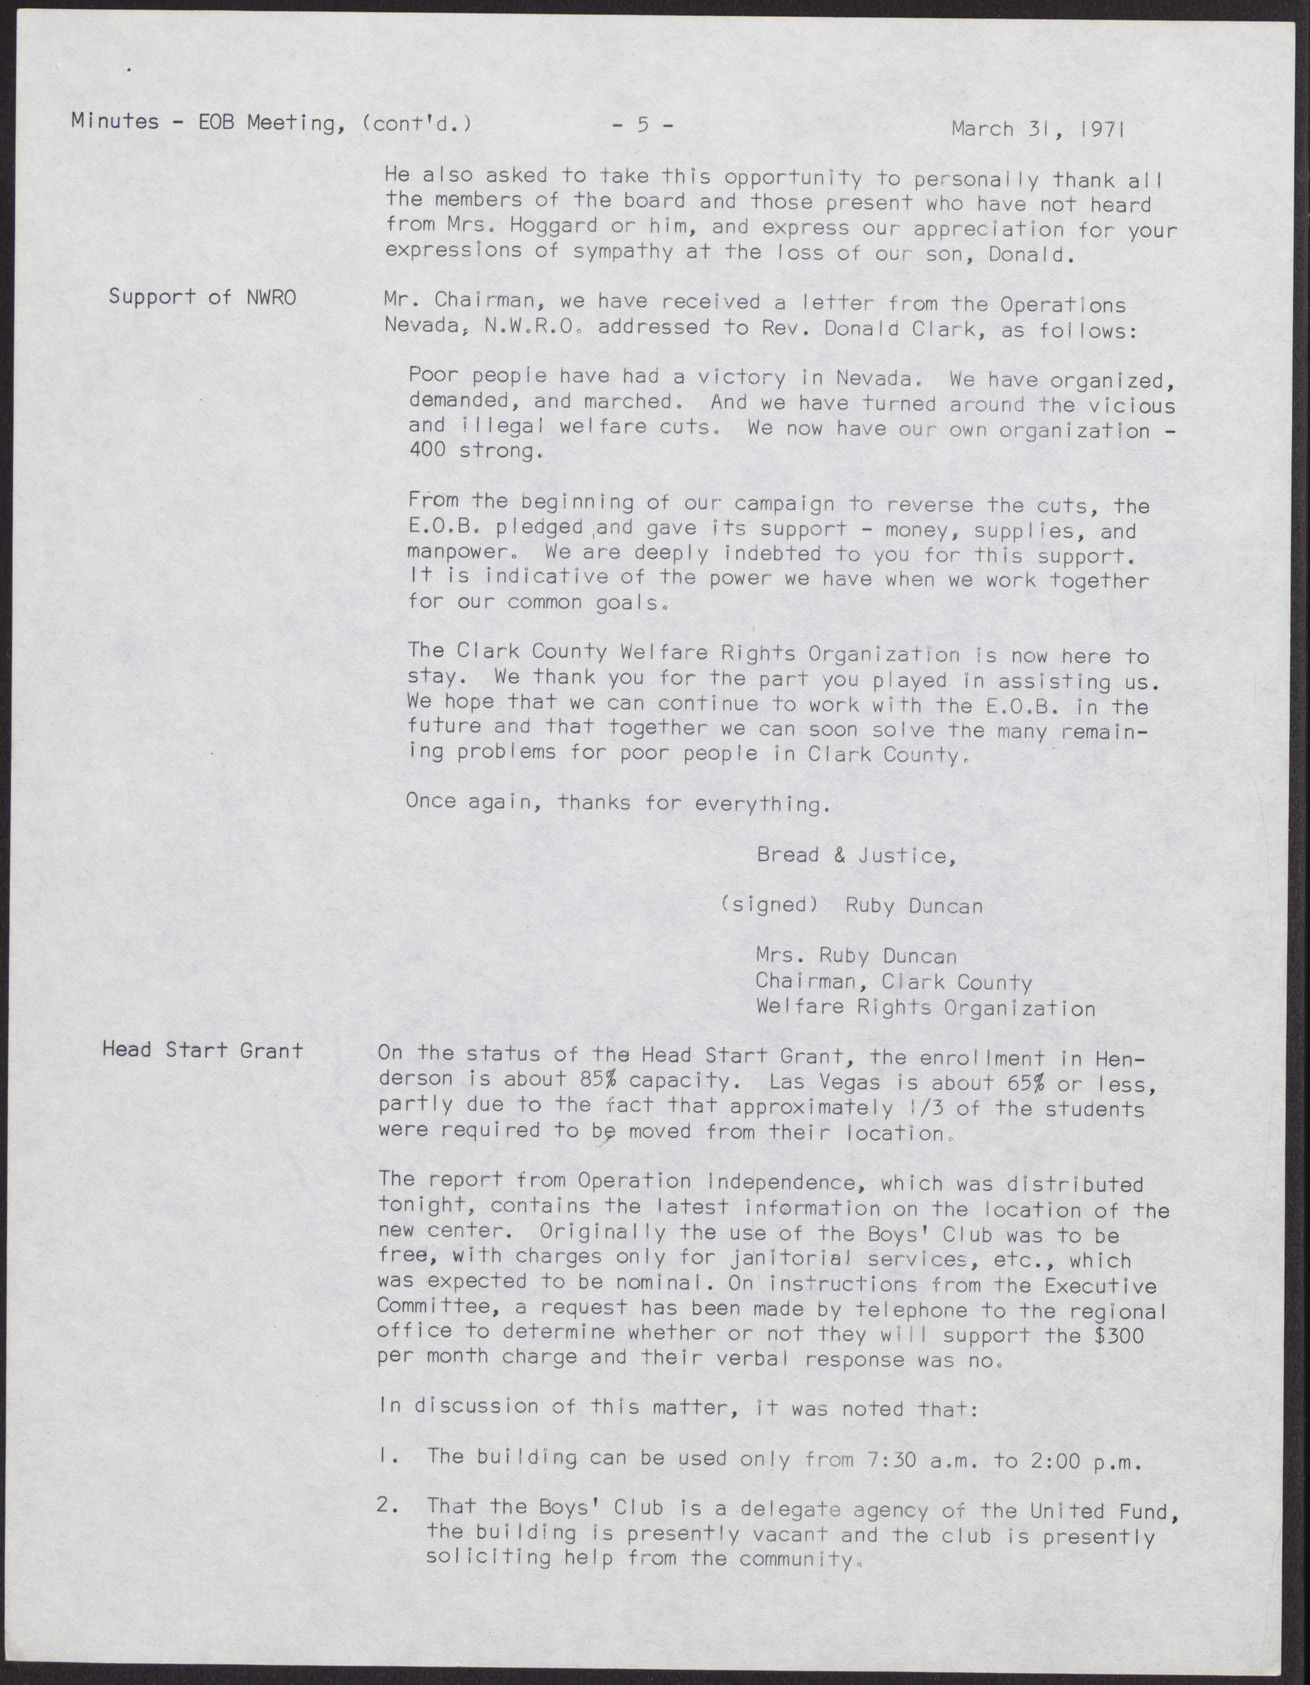 Minutes from Economic Opportunity Board meeting (9 pages), March 31, 1971, page 5